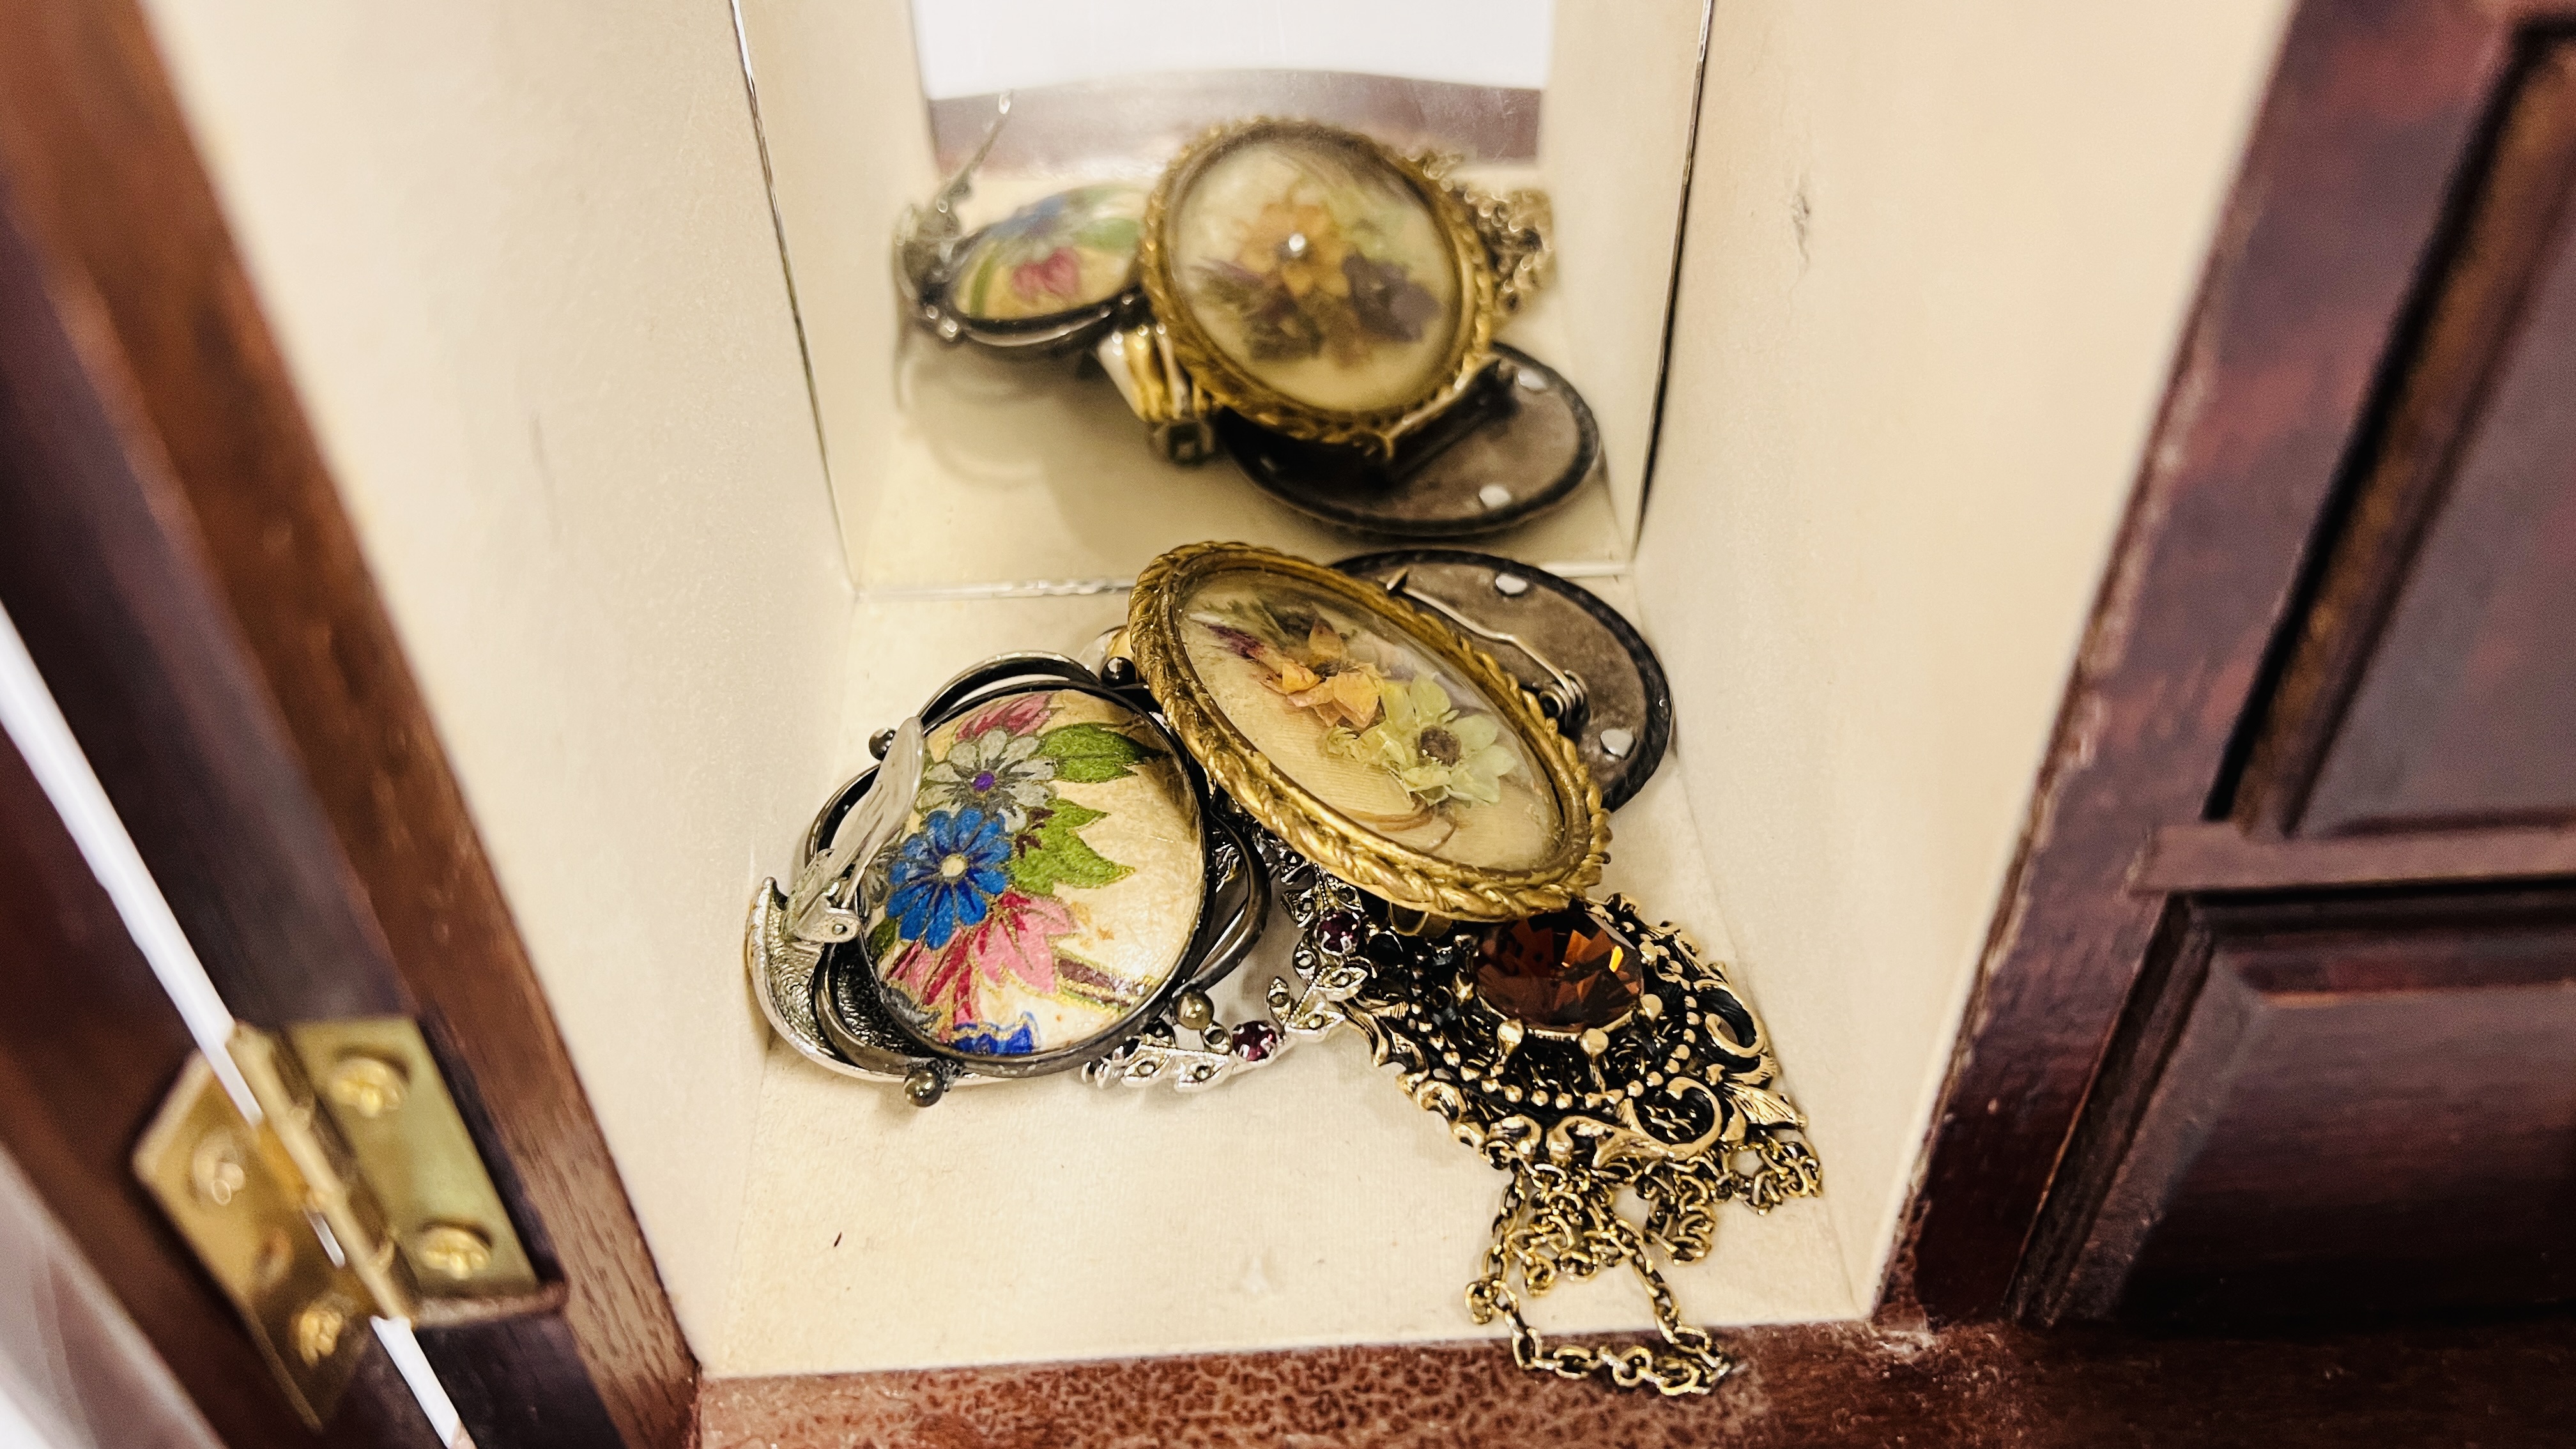 TWO JEWELLERY BOXES CONTAINING VINTAGE AND MODERN COSTUME JEWELLERY. - Image 11 of 13